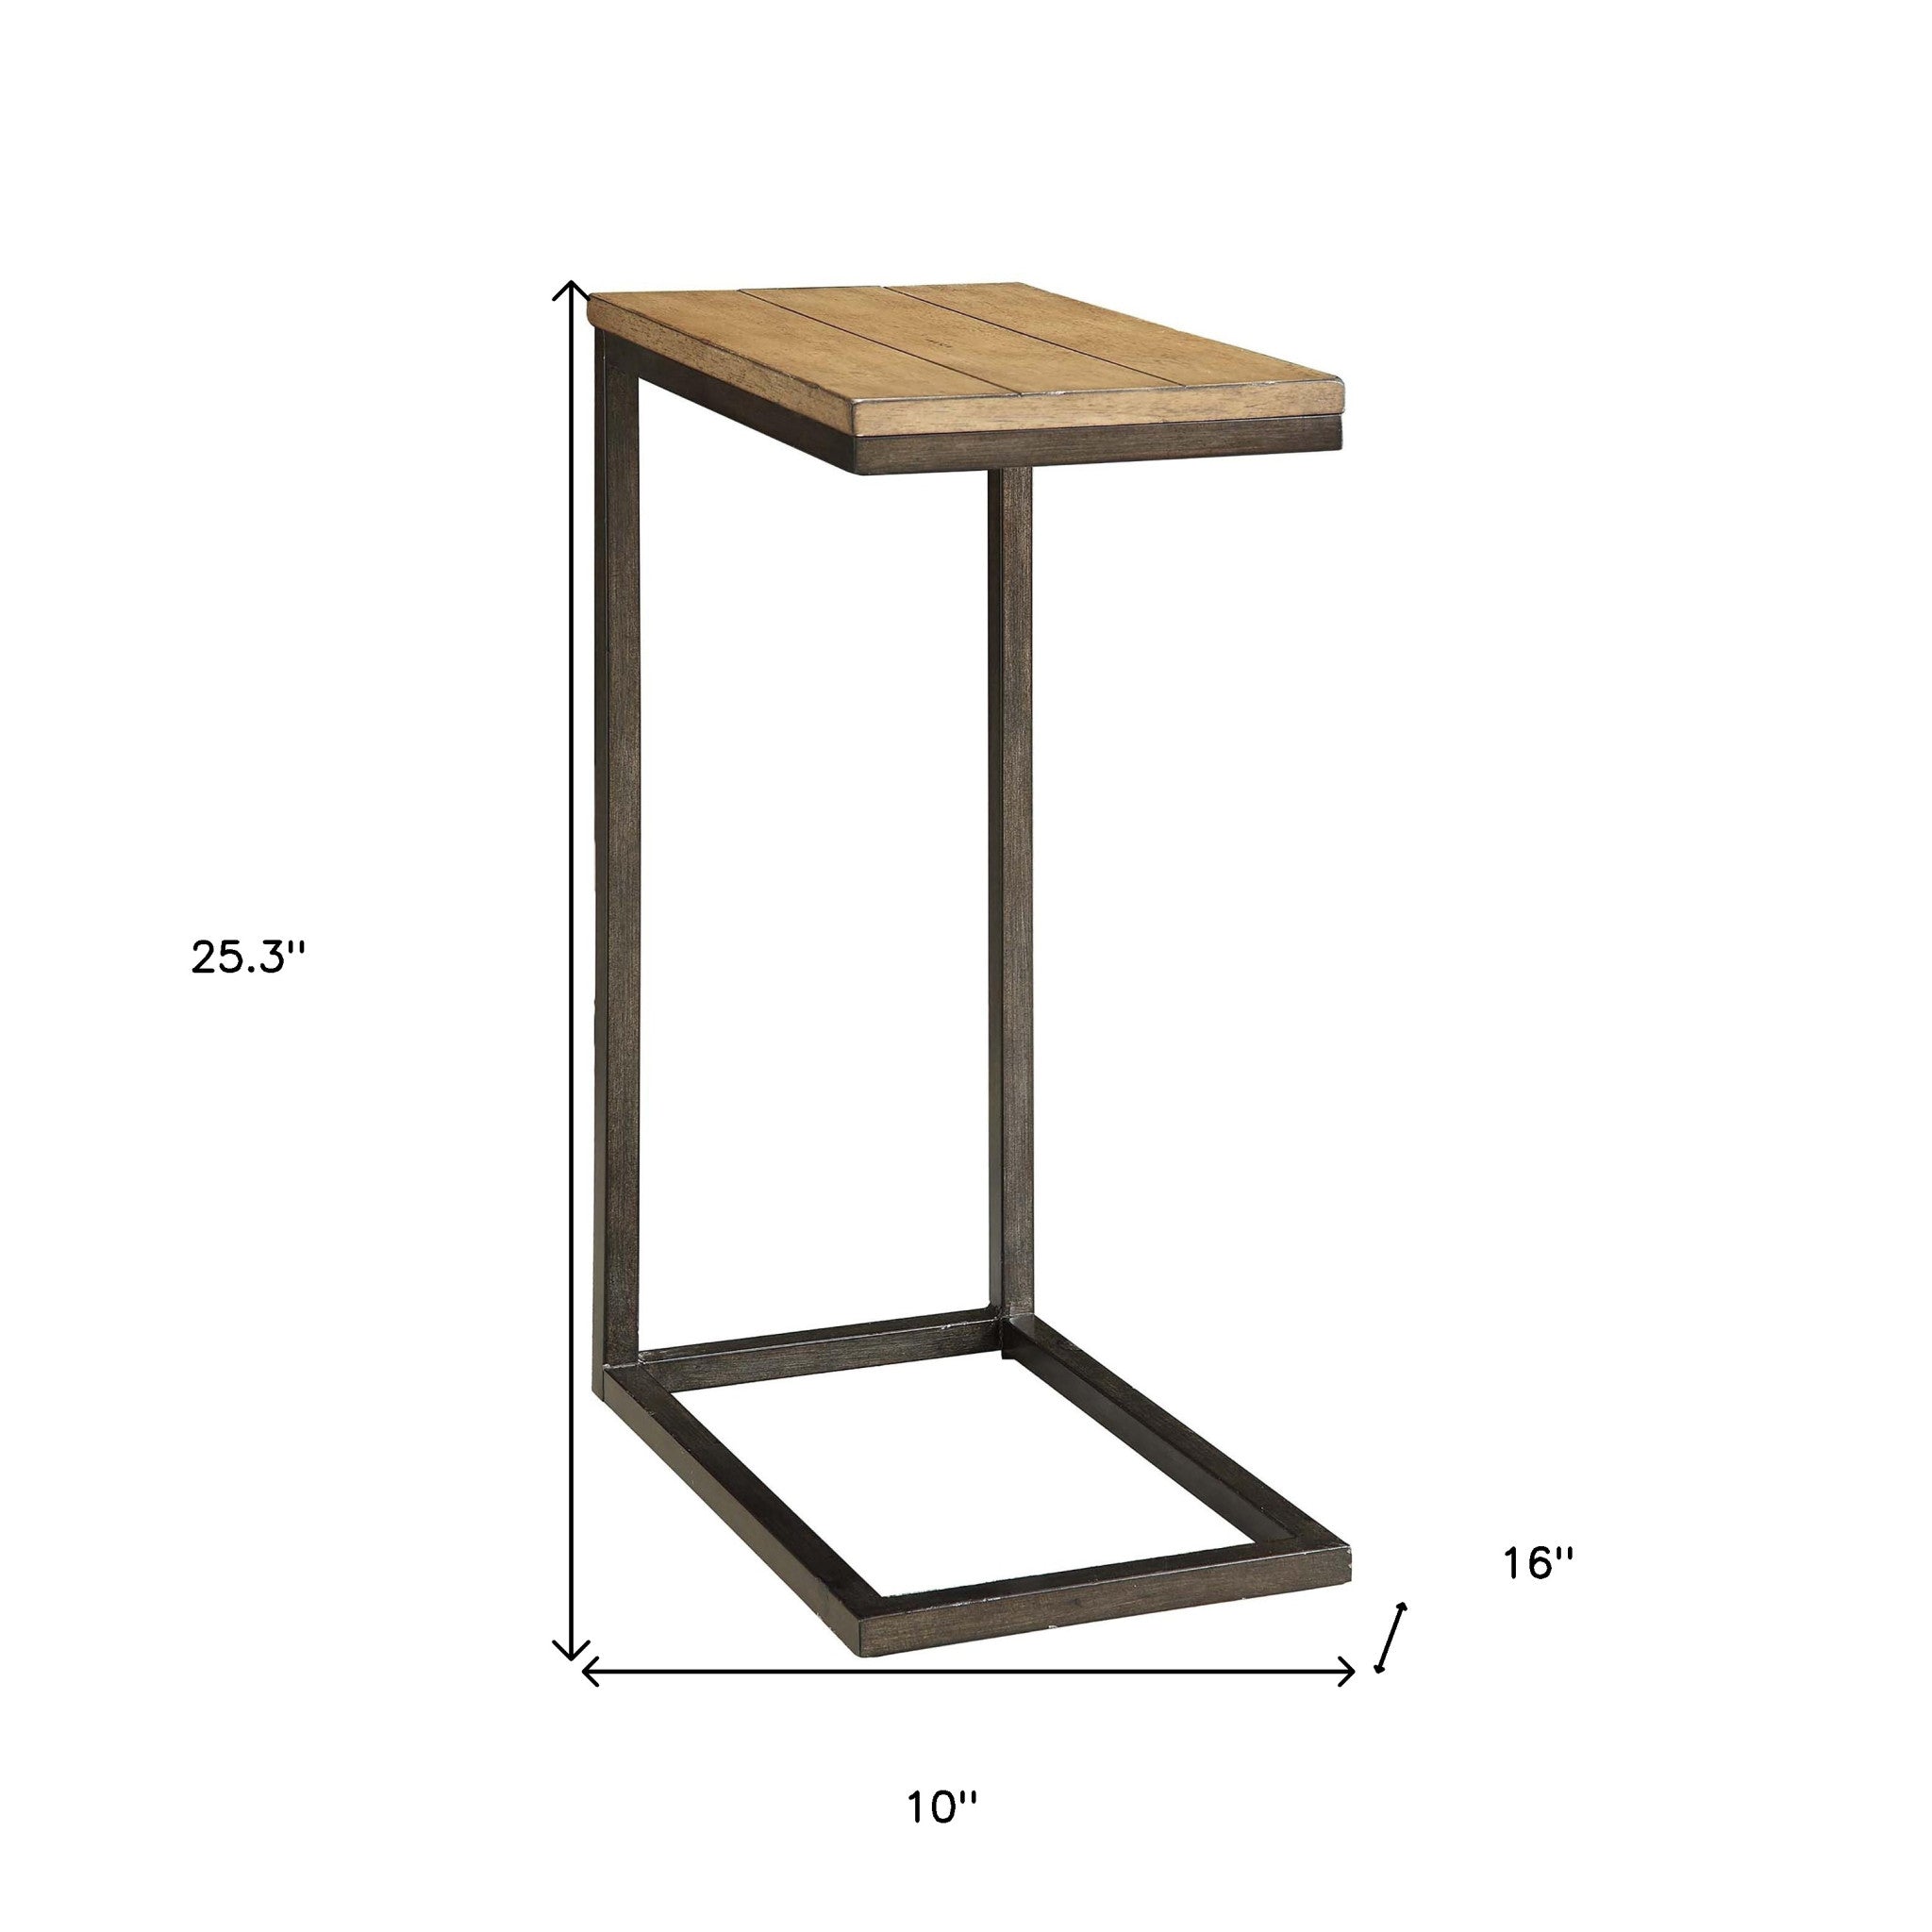 25" Black And Oak Solid Wood Rectangular End Table